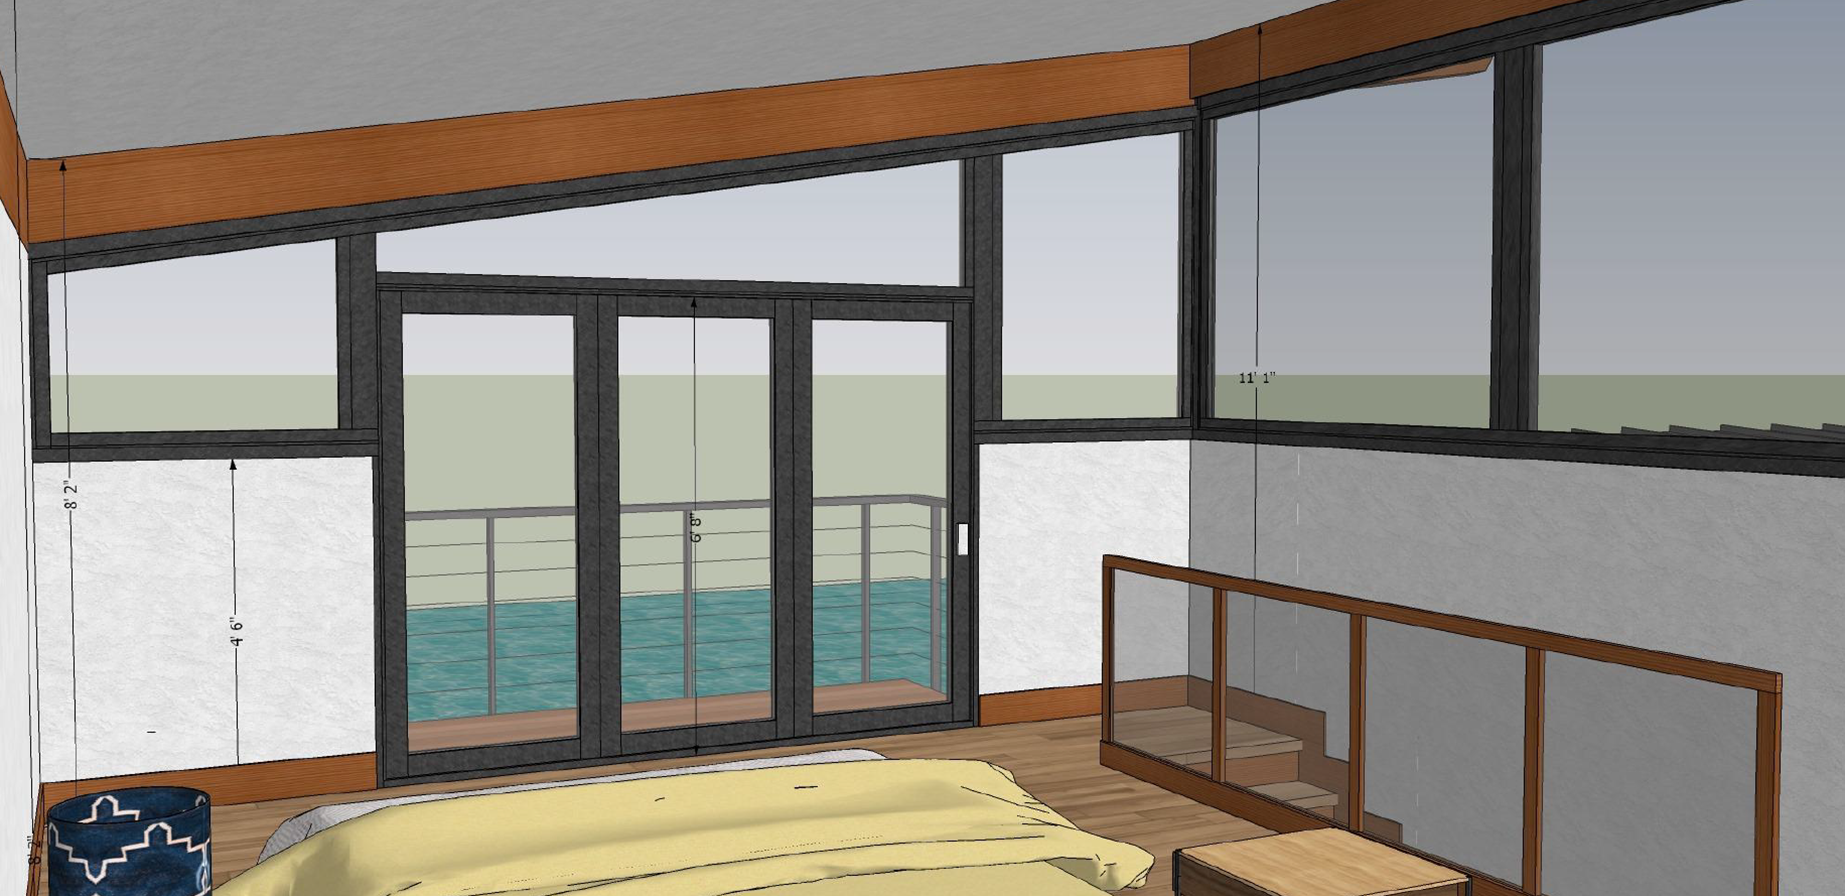 design of a bedroom with sliding doors going to the deck